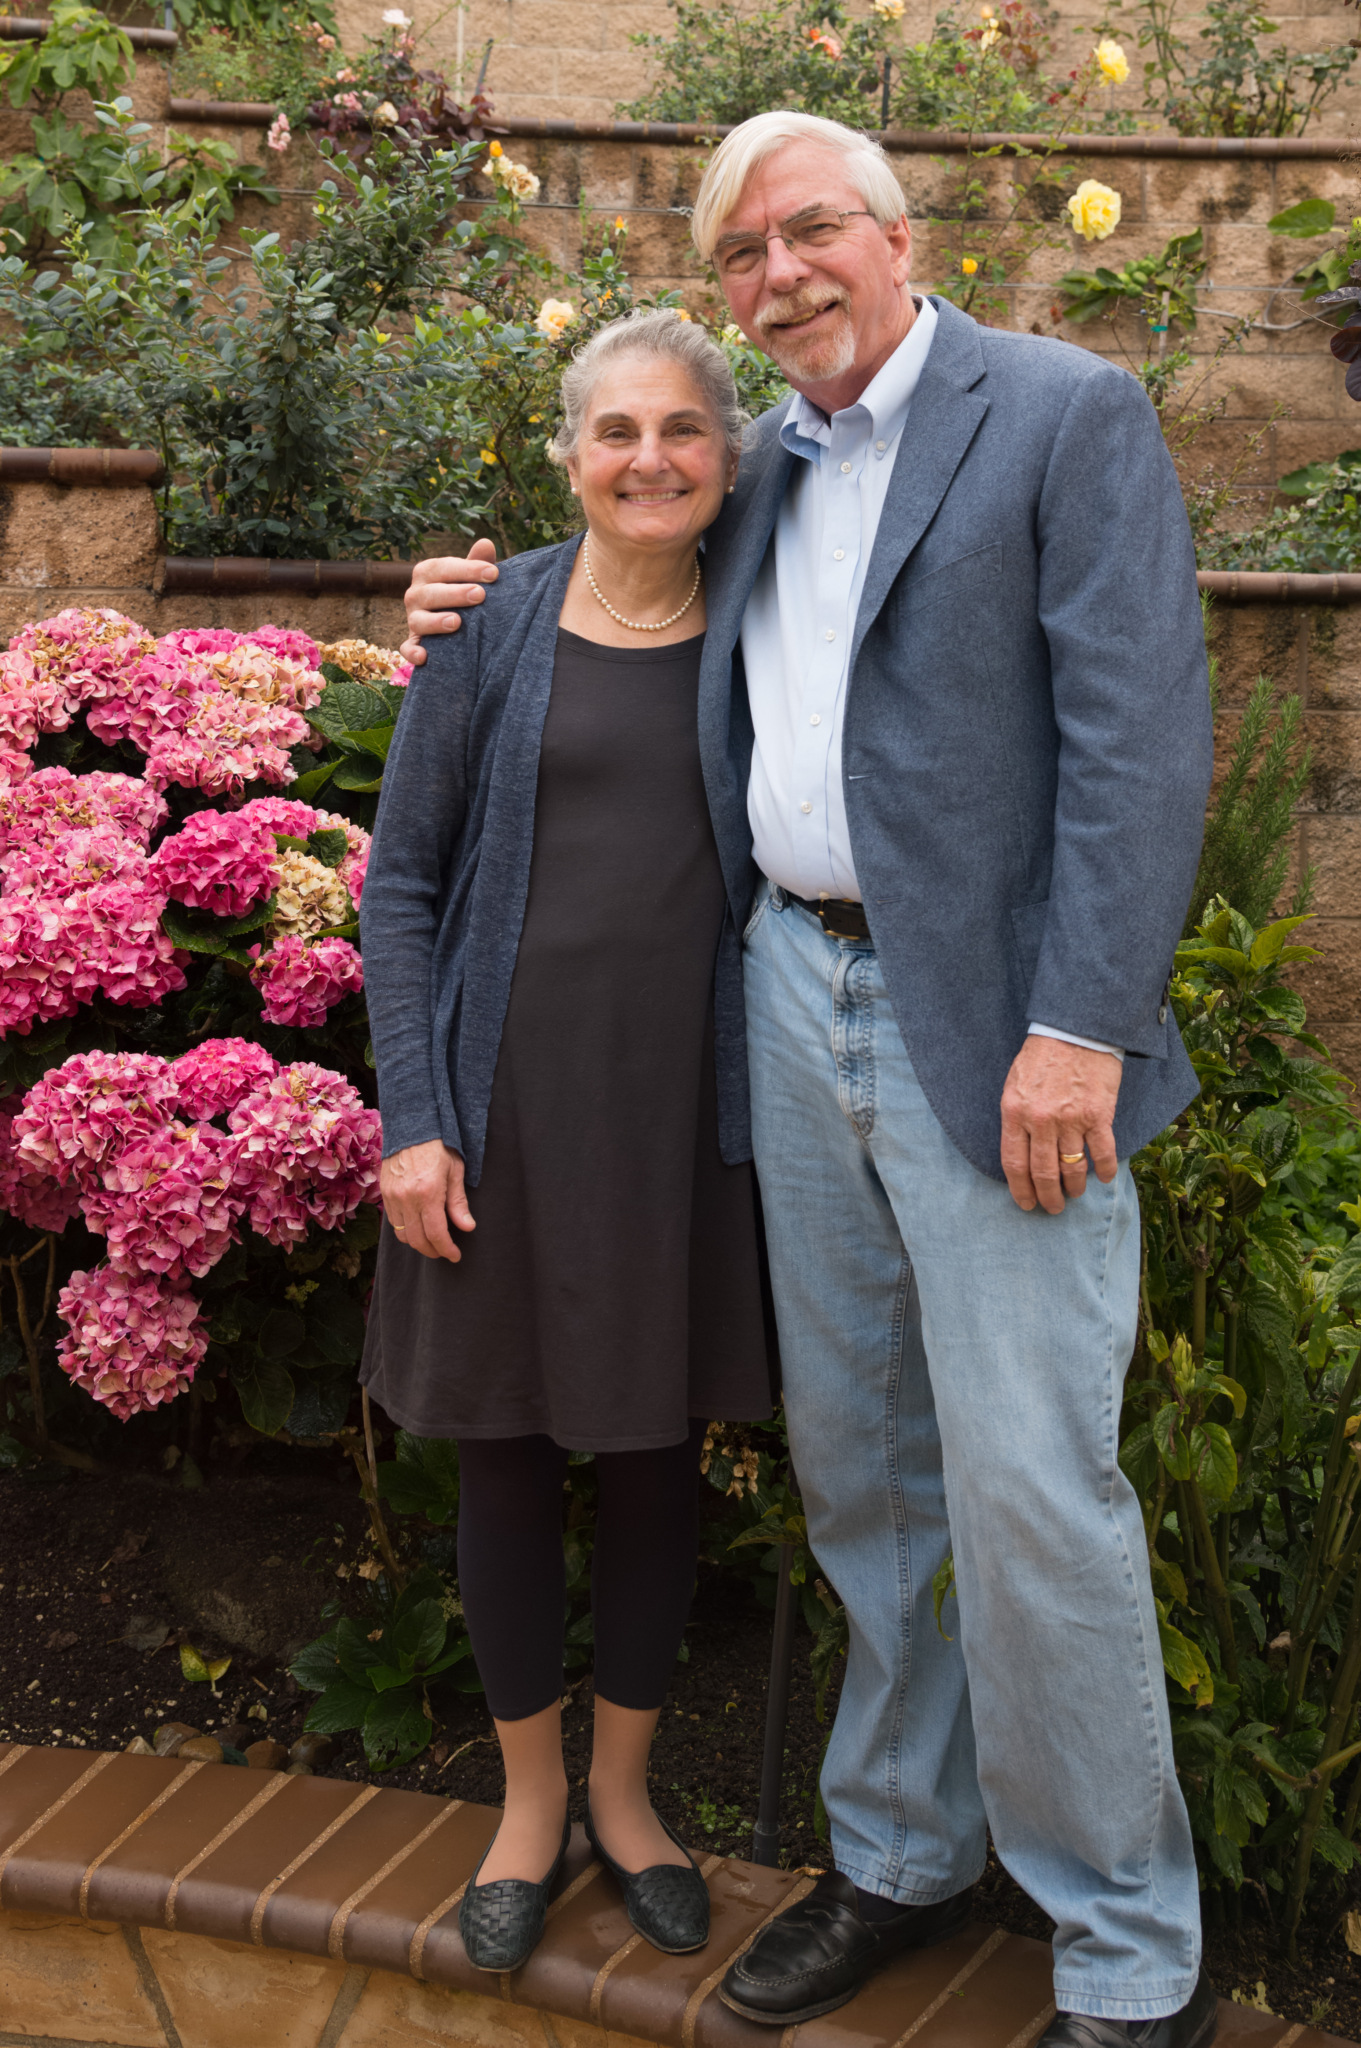 Elaine and Doug Muchmore pose in their garden